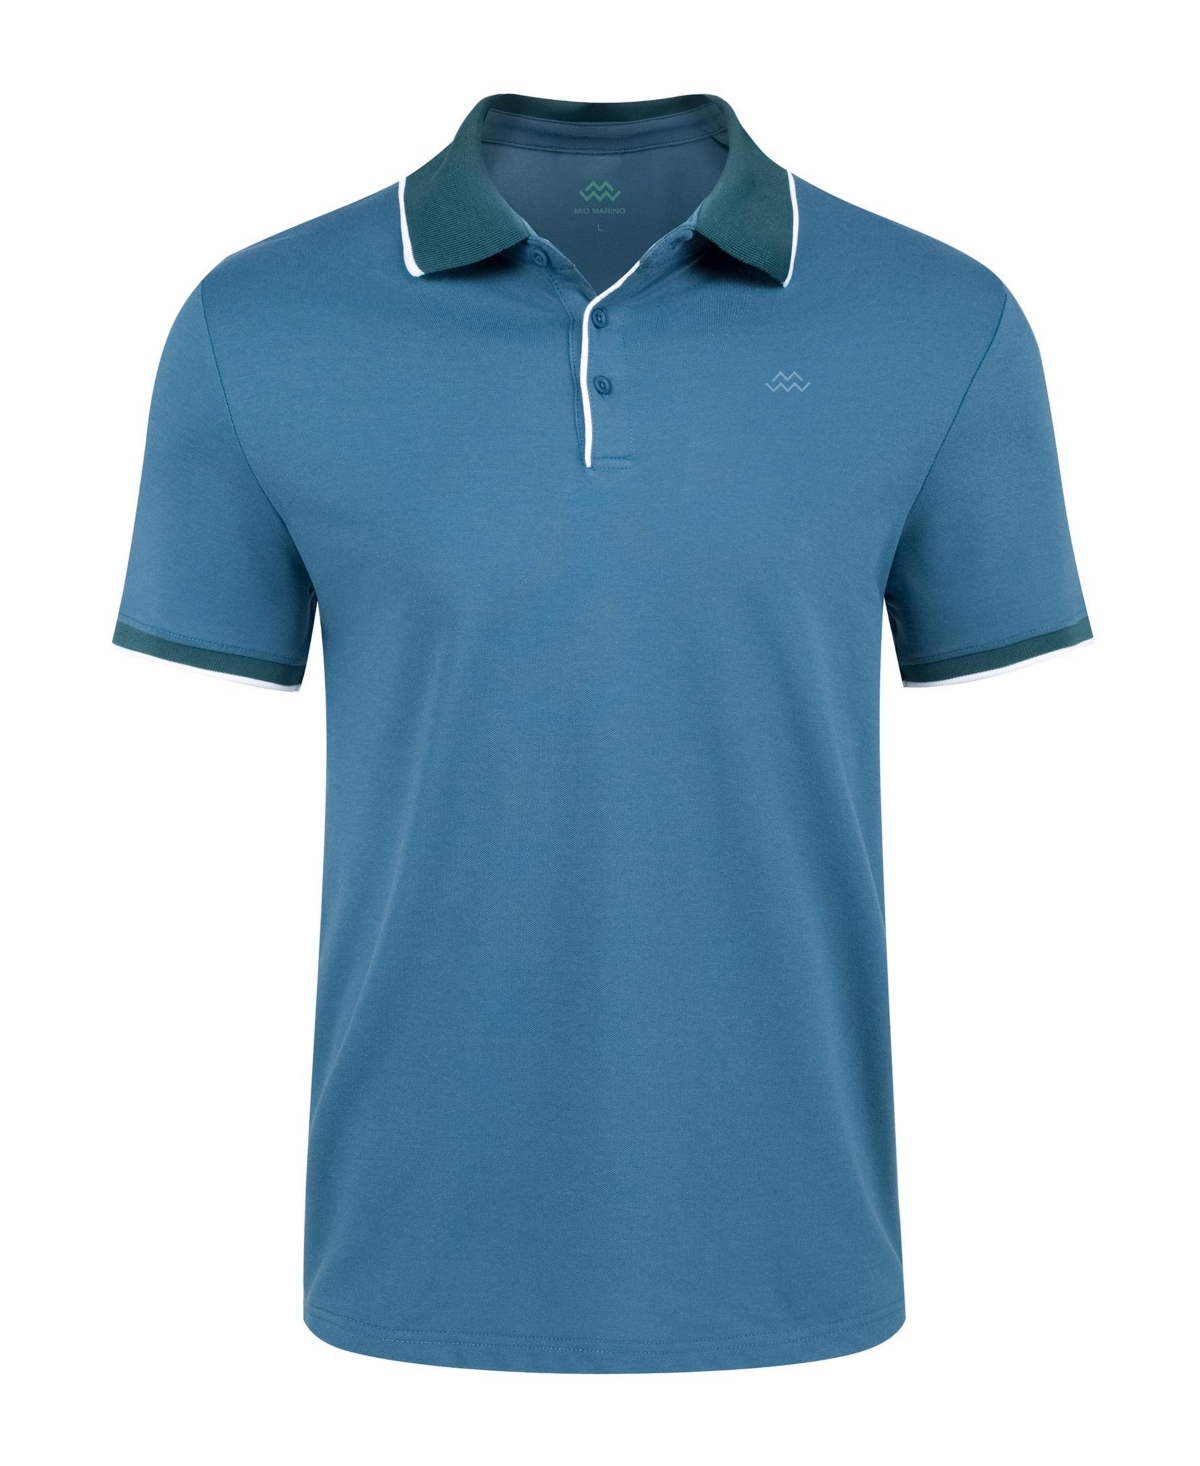 Big & Tall Classic-Fit Cotton-Blend Pique Polo Shirt with Contrast Collar - Denim blue